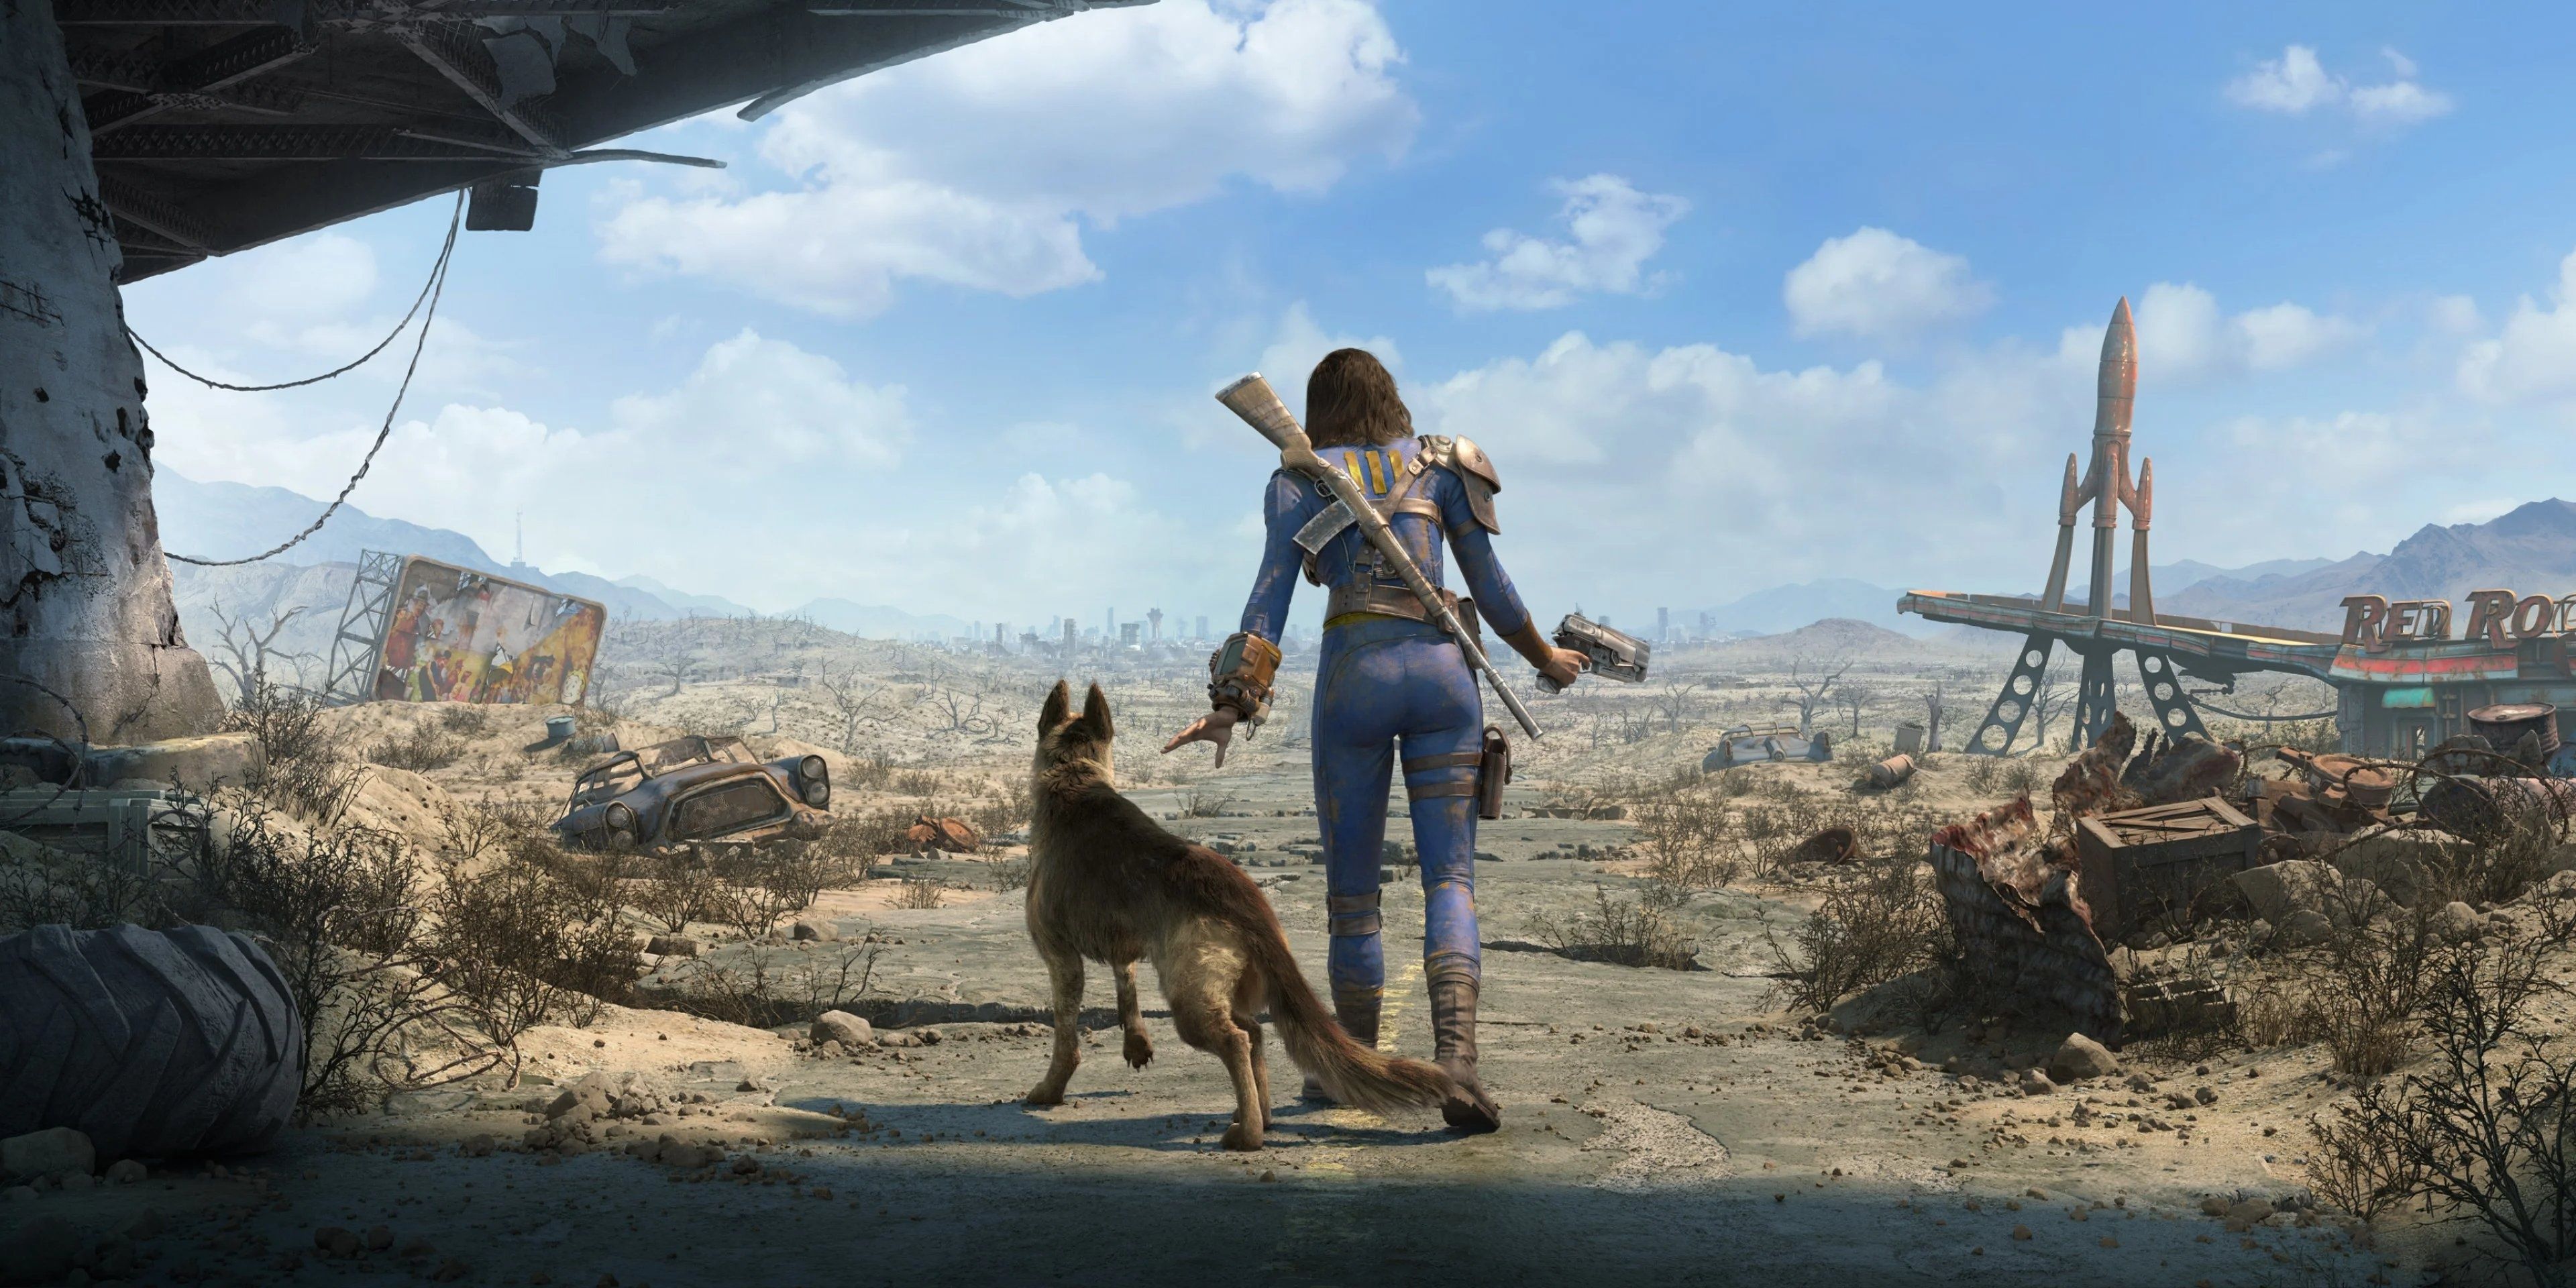 The Sole survivor is walking through the wasteland with her dog called Dogmeat in Fallout 4